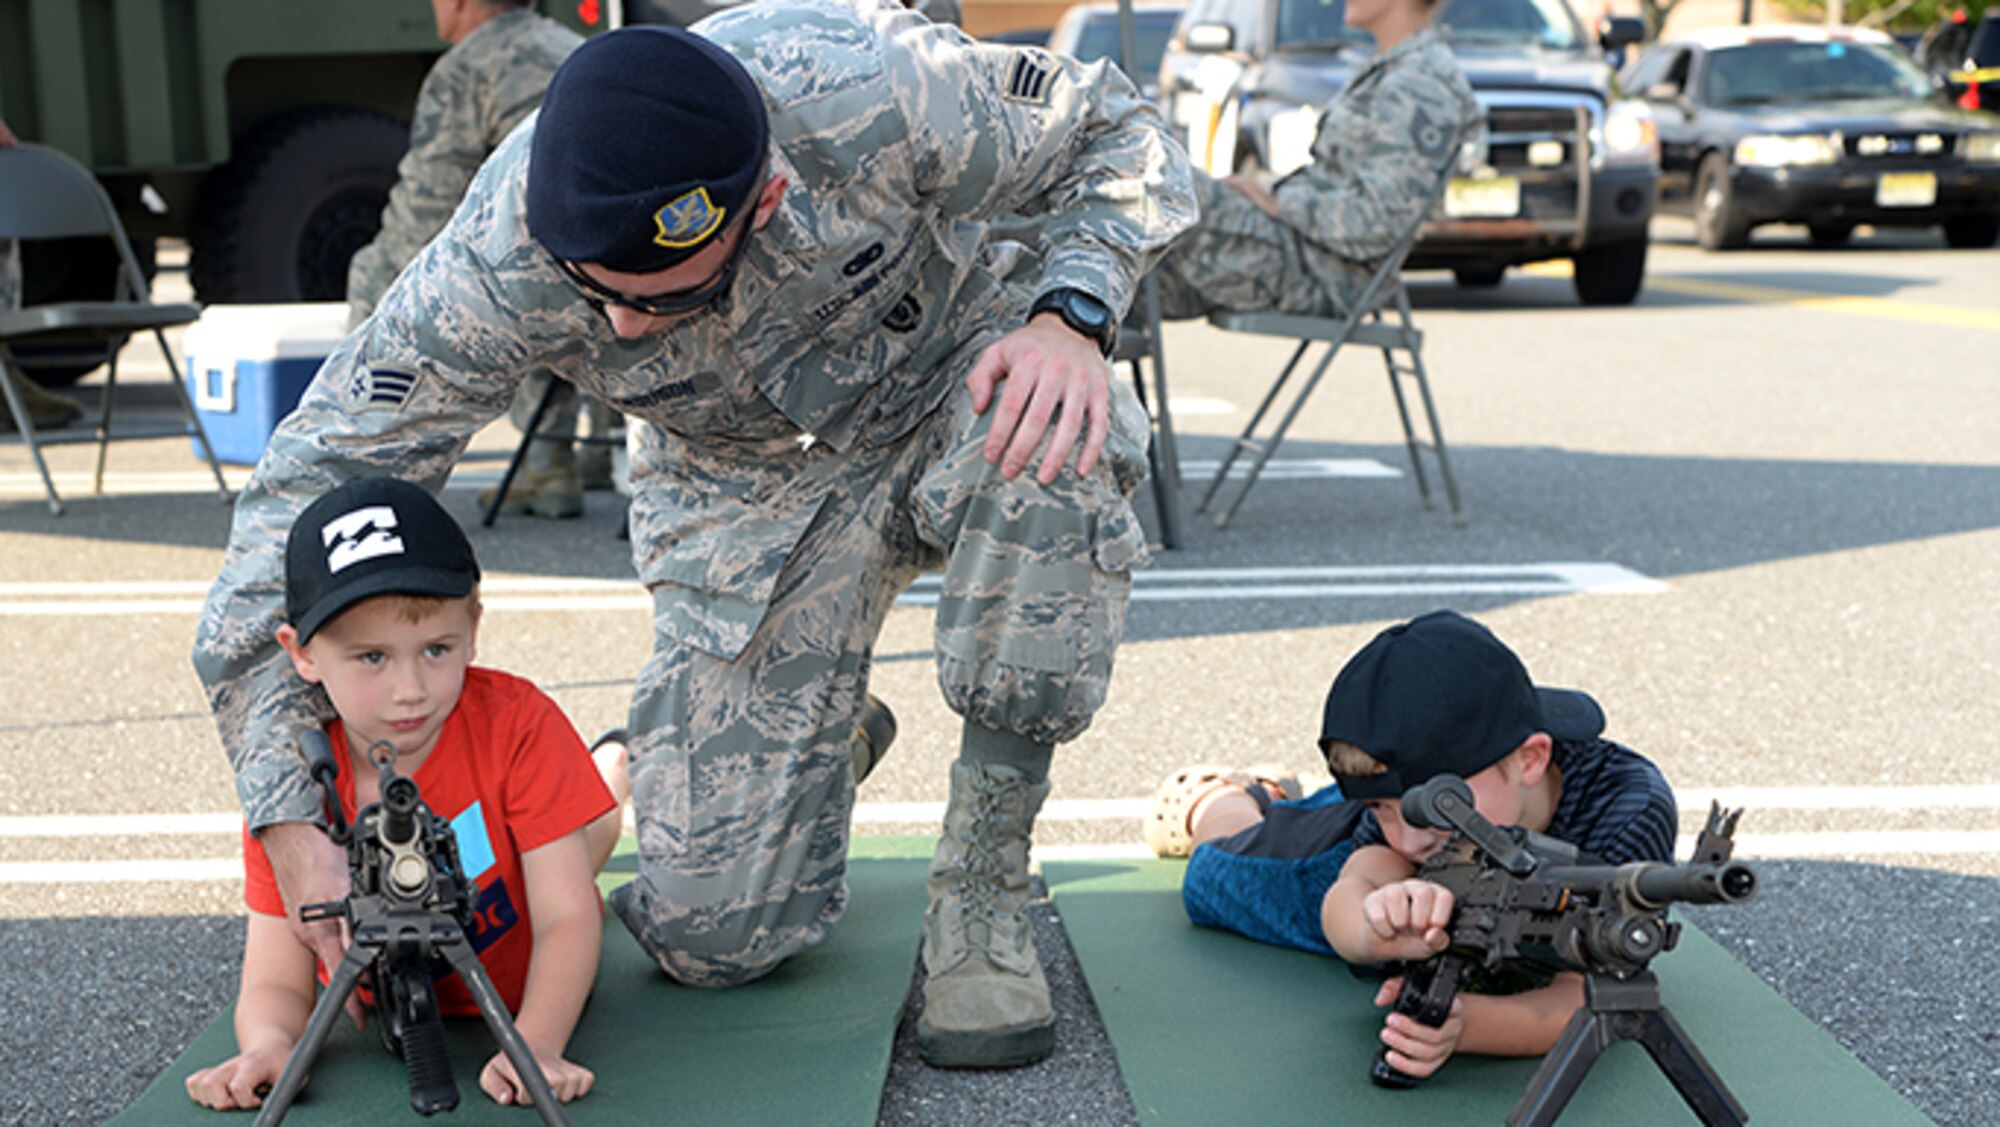 A picture of U.S. Air Force Senior Airman Zachary D. Ferguson, a member of the 177th Fighter Wing’s Security Forces Squadron, showing a community member how to use security forces equipment.